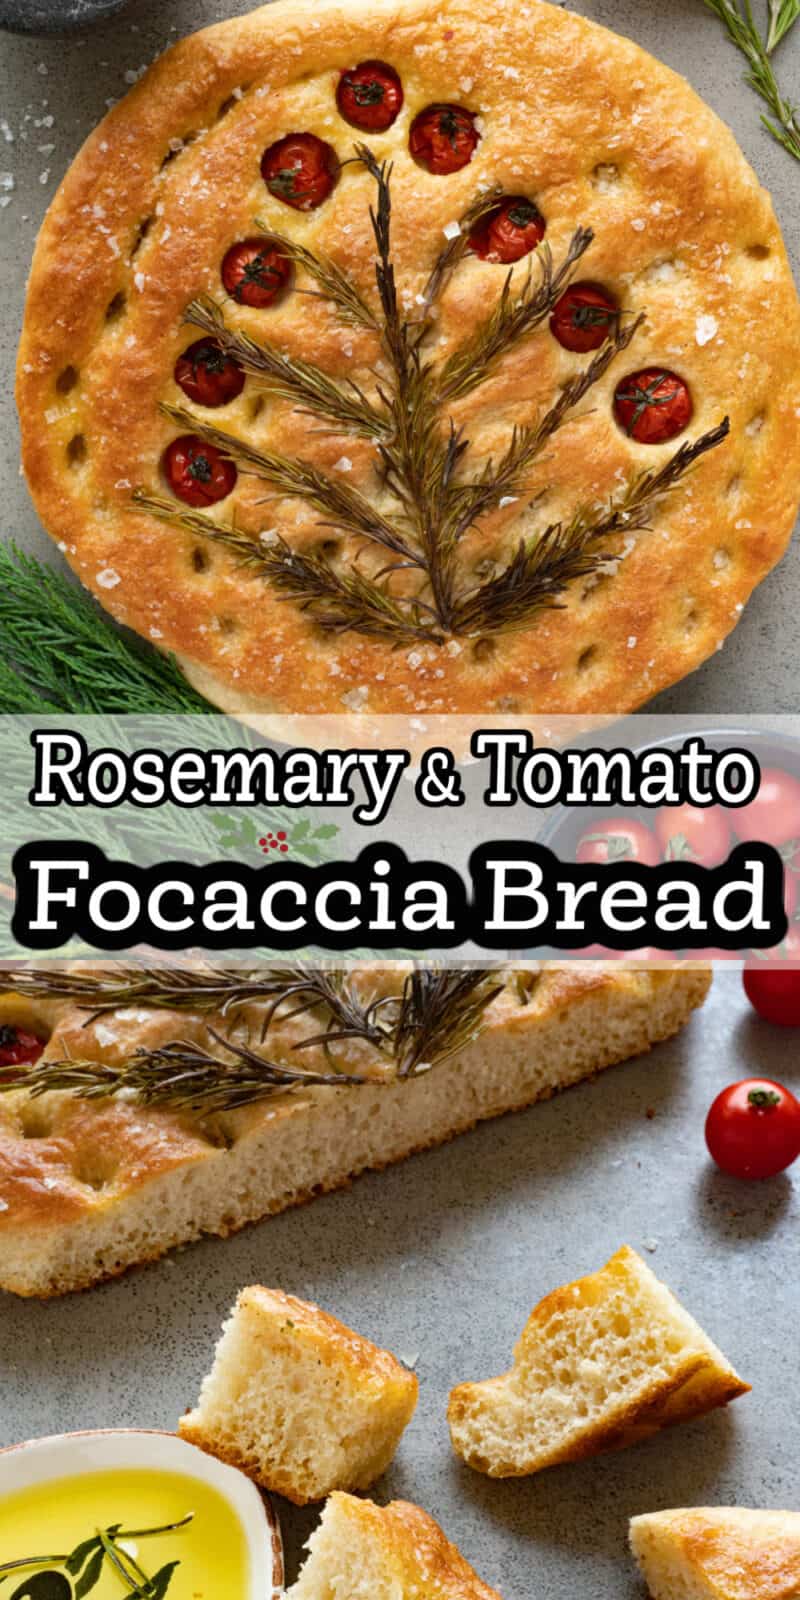 images of focaccia bread with text